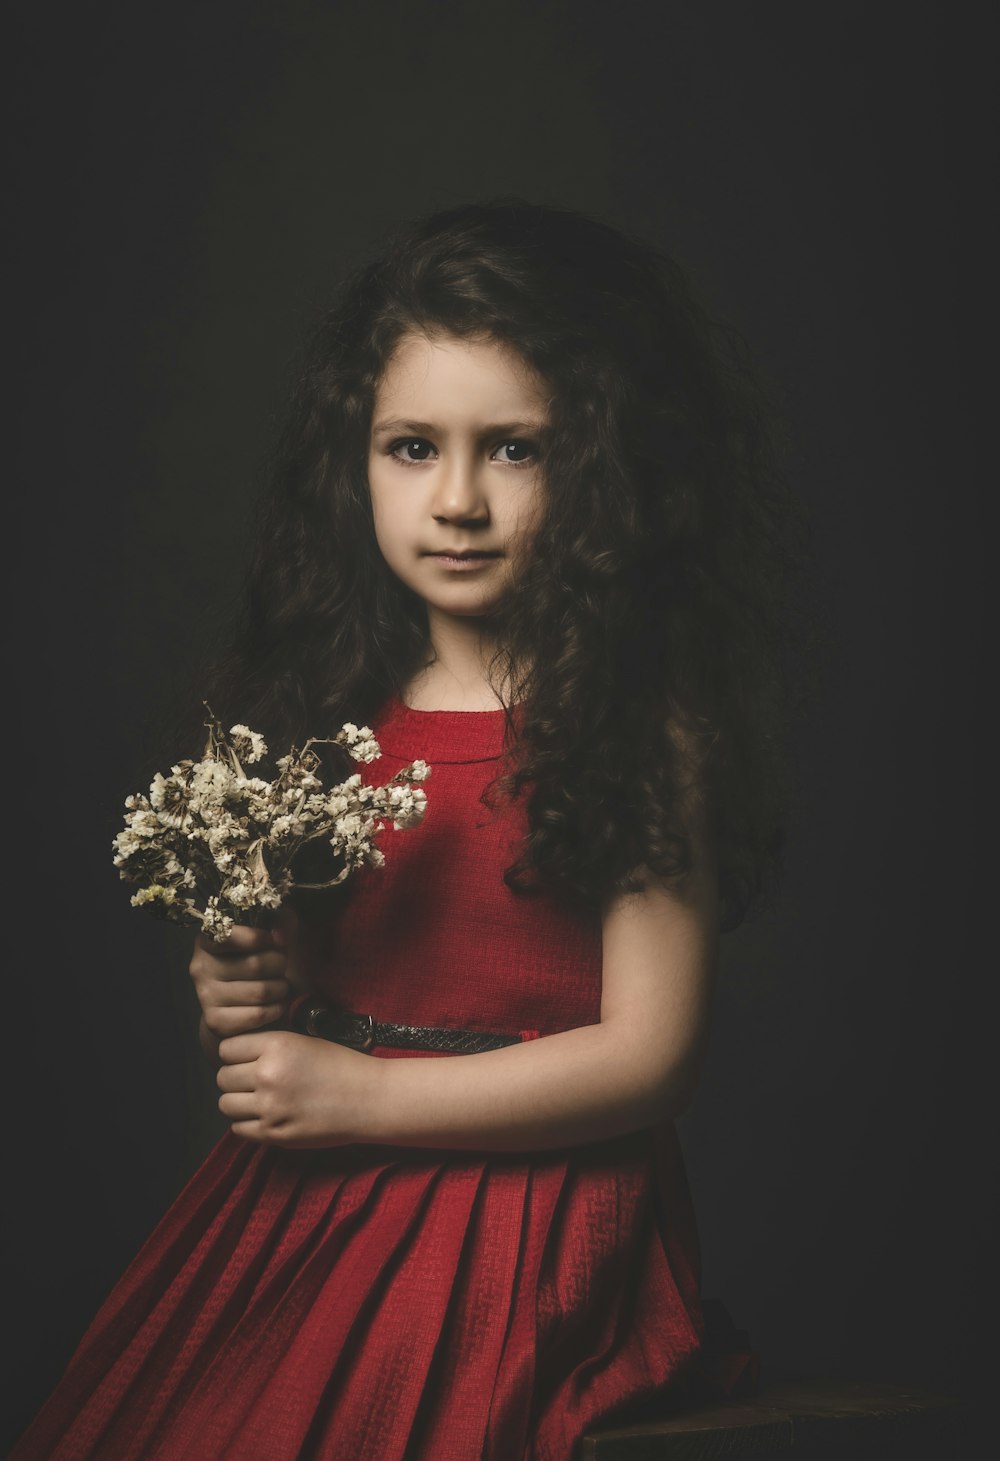 a young girl in a red dress holding a bouquet of flowers